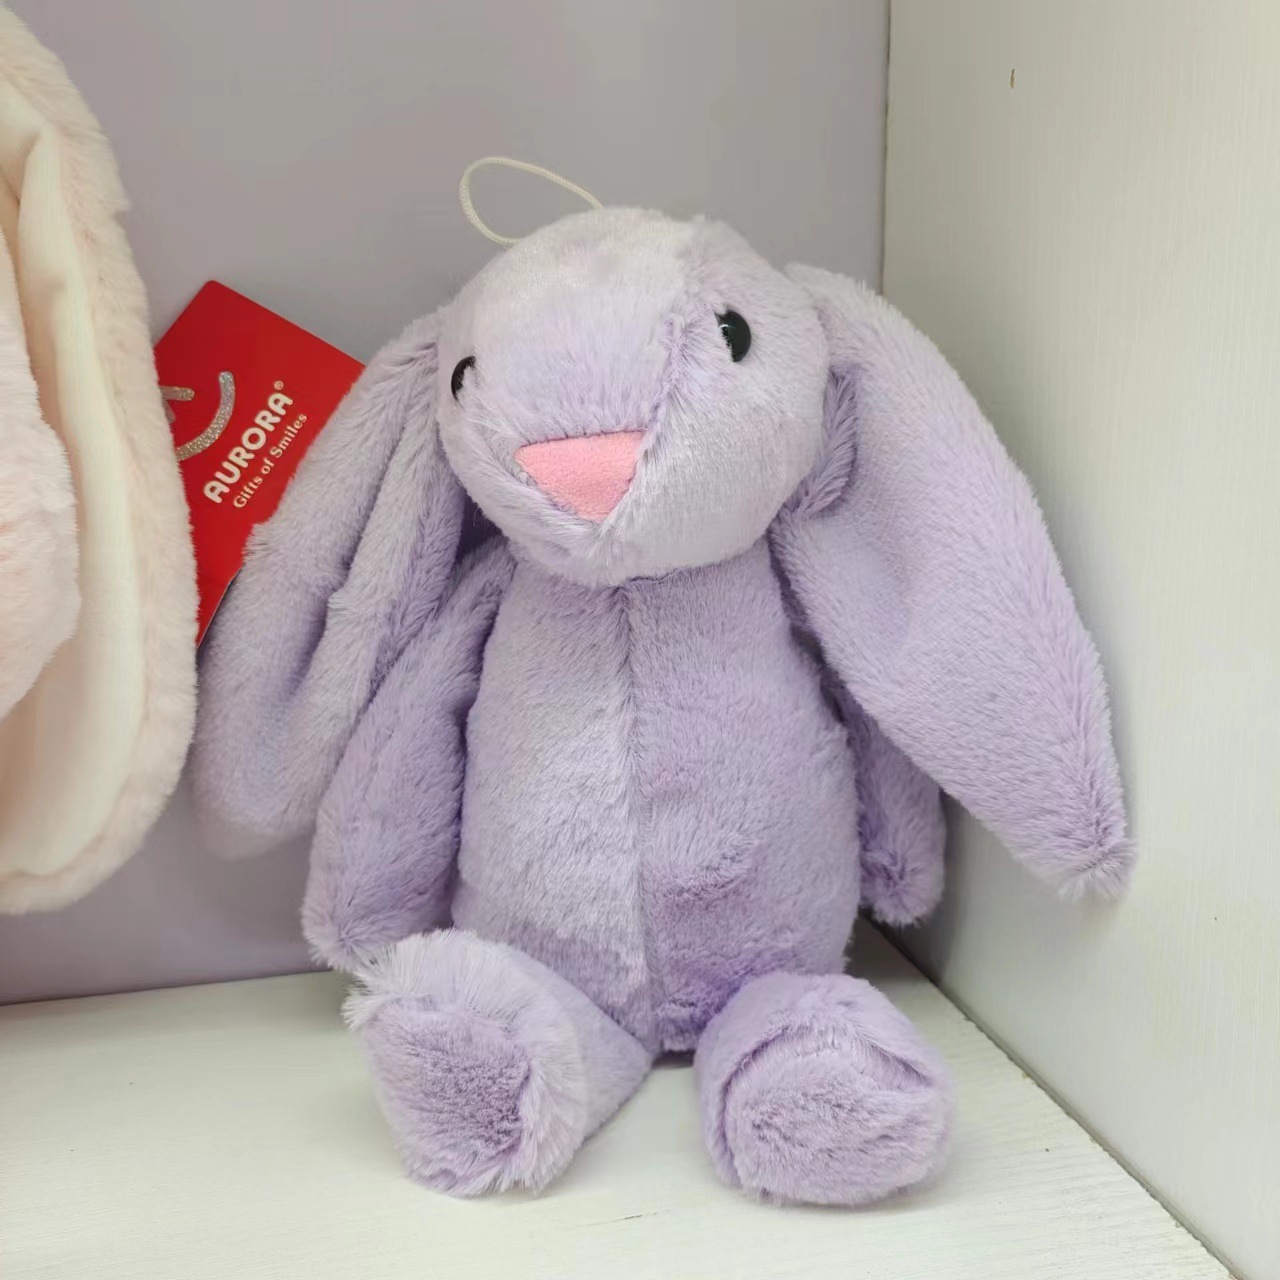 Bunny Plushies Adorable Lop-Eared Bunny Plush Toy - Perfect Cuddly Gift